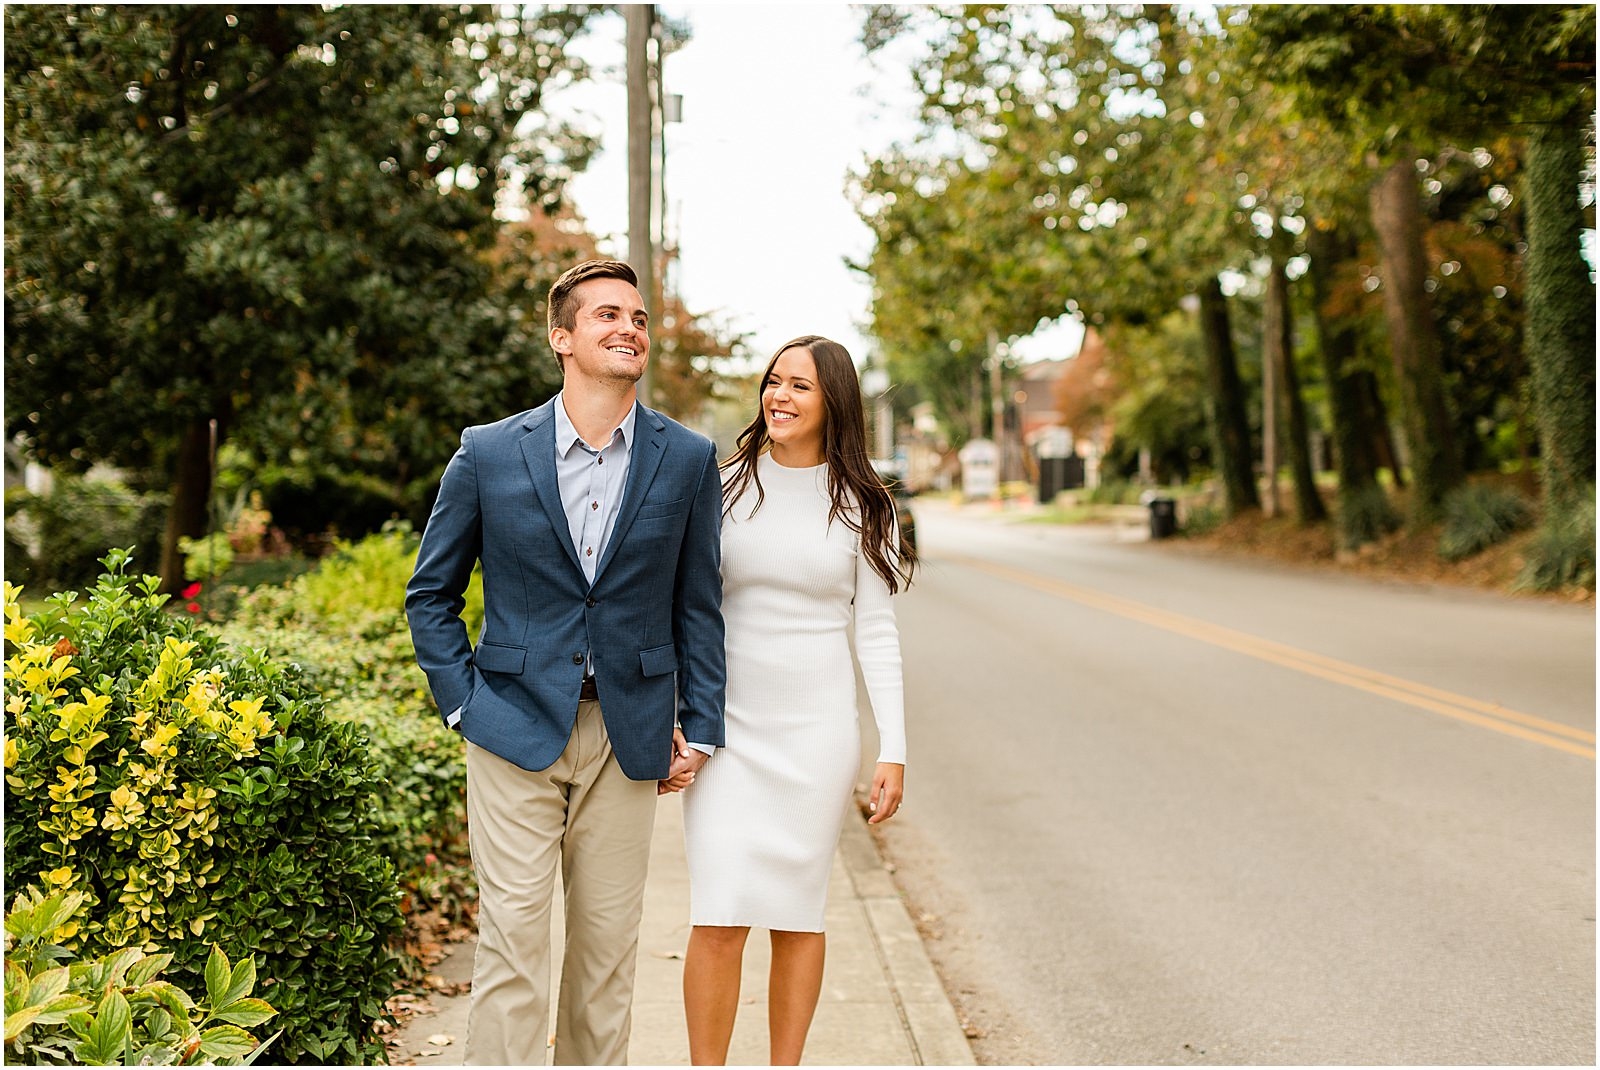 Emma and Jace's Downtown Newburgh Engagement Session | Bret and Brandie Photography | Evansville Indiana Wedding Photographers_0018.jpg